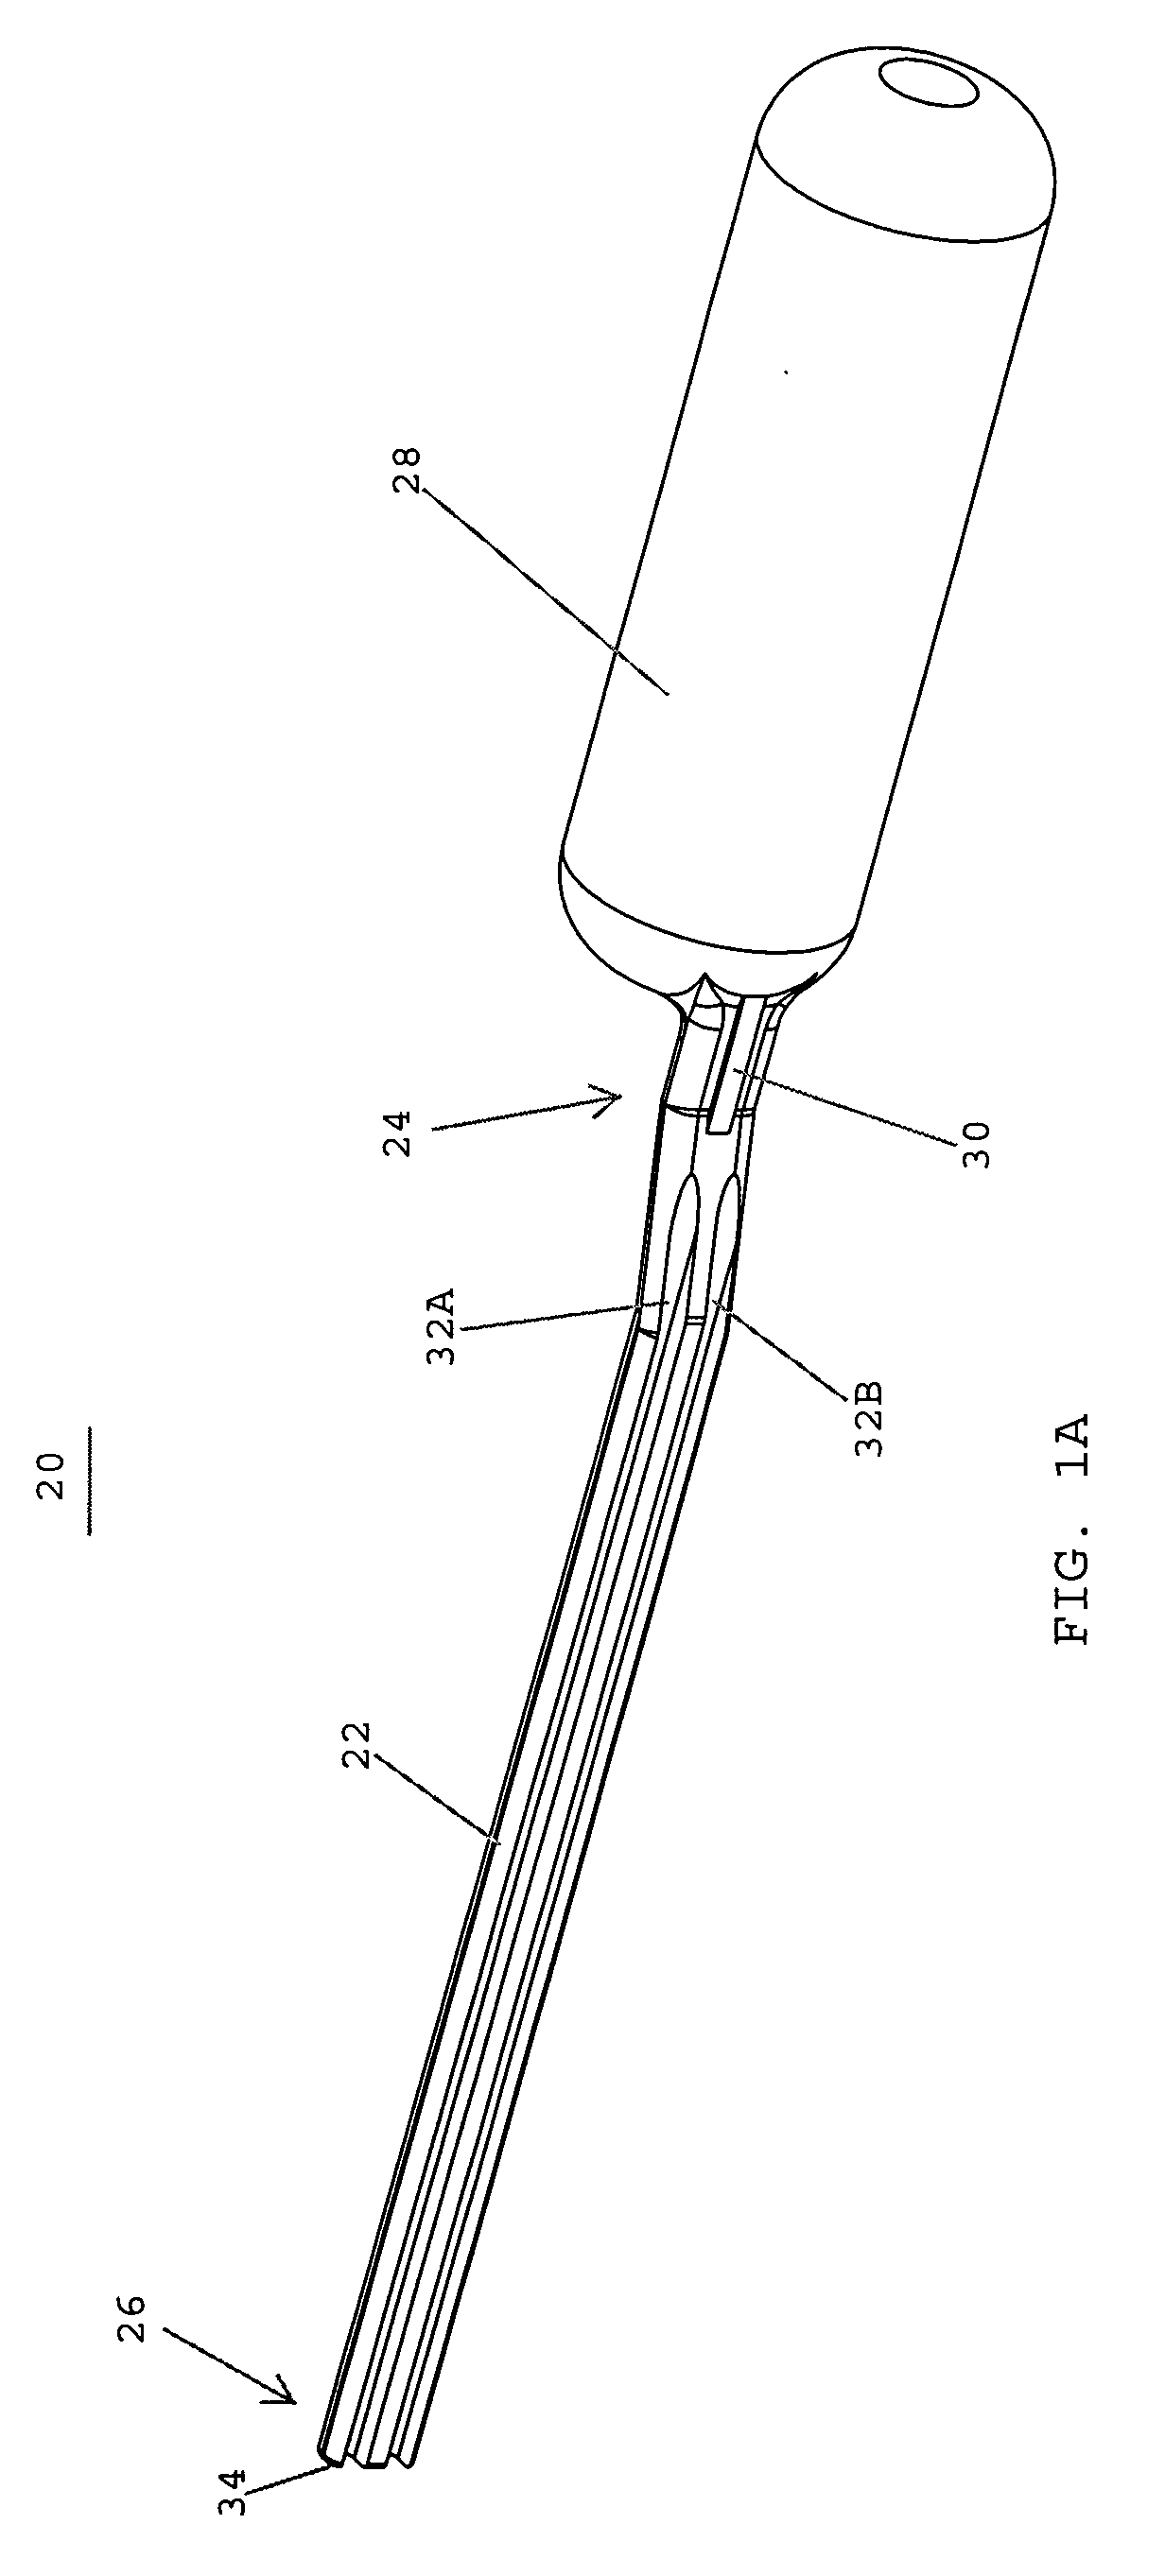 Devices for tensioning barbed sutures and methods therefor